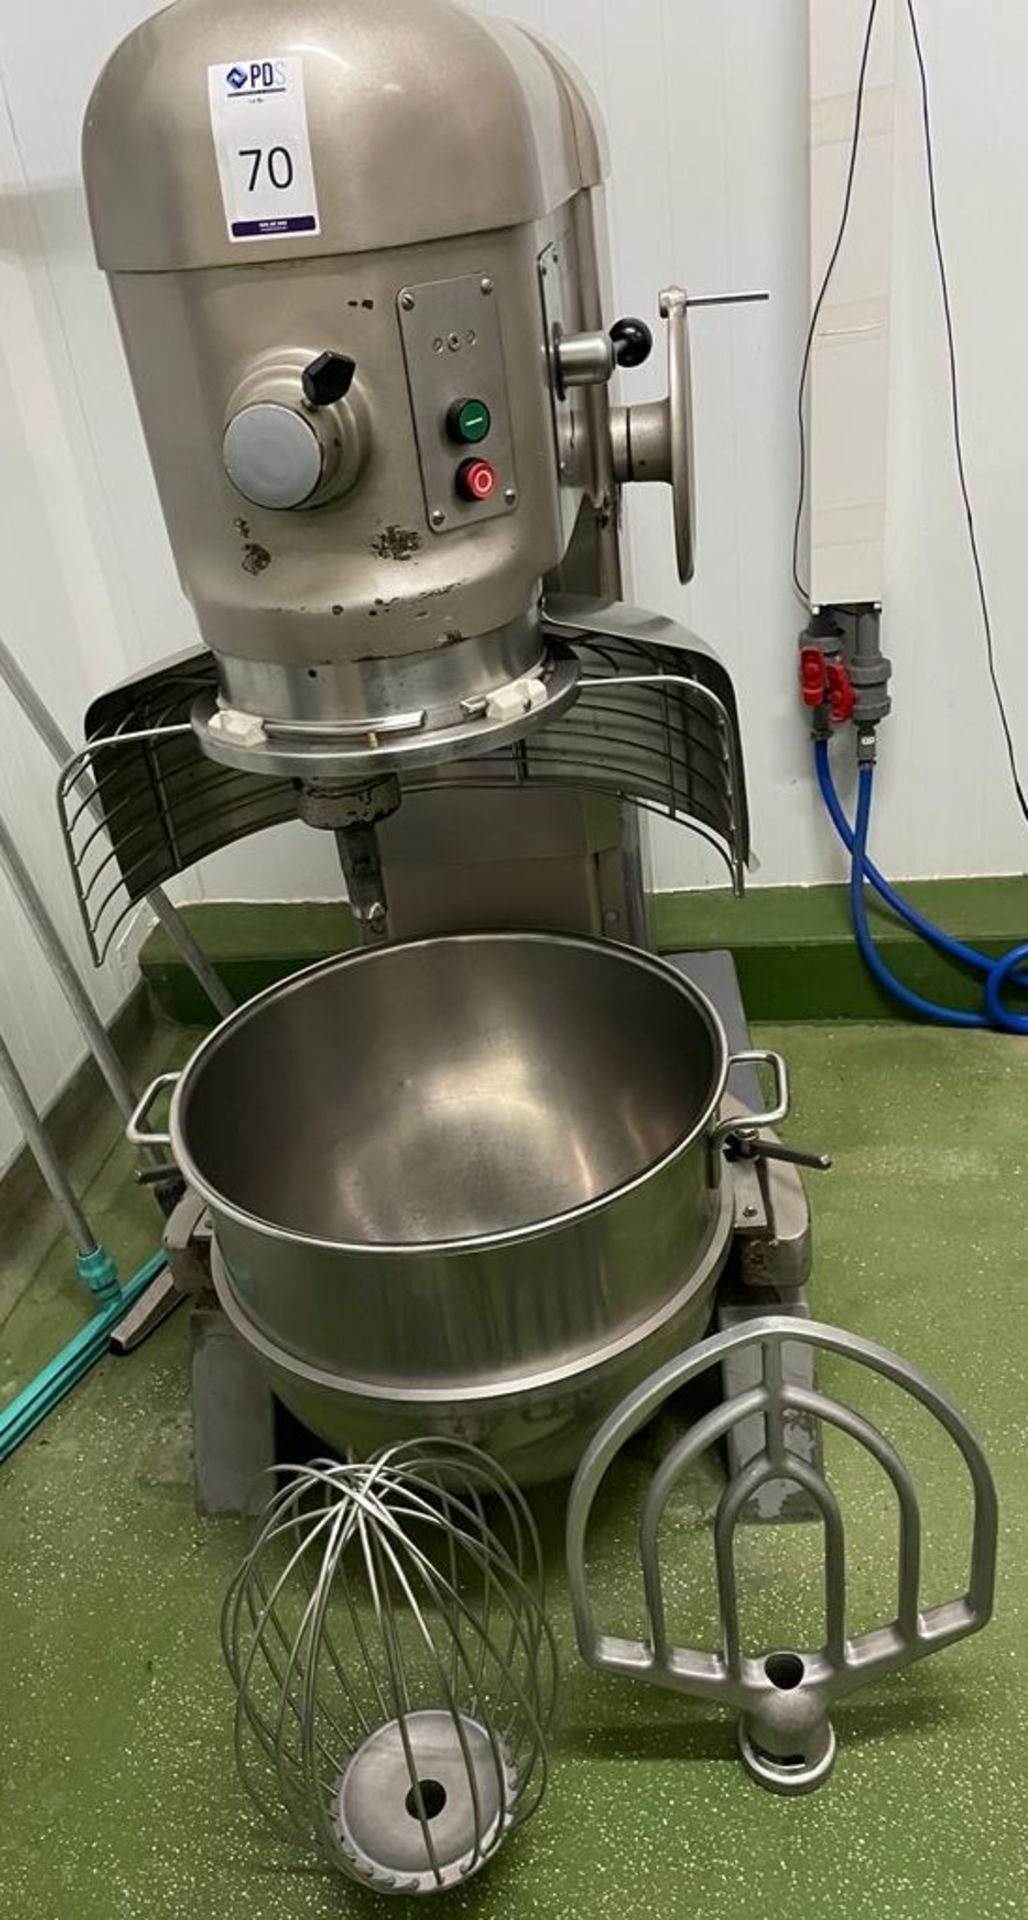 Hobart Model H800 Floor Standing Mixing Machine, Serial Number 97-0170-710, 400v (Location: NW